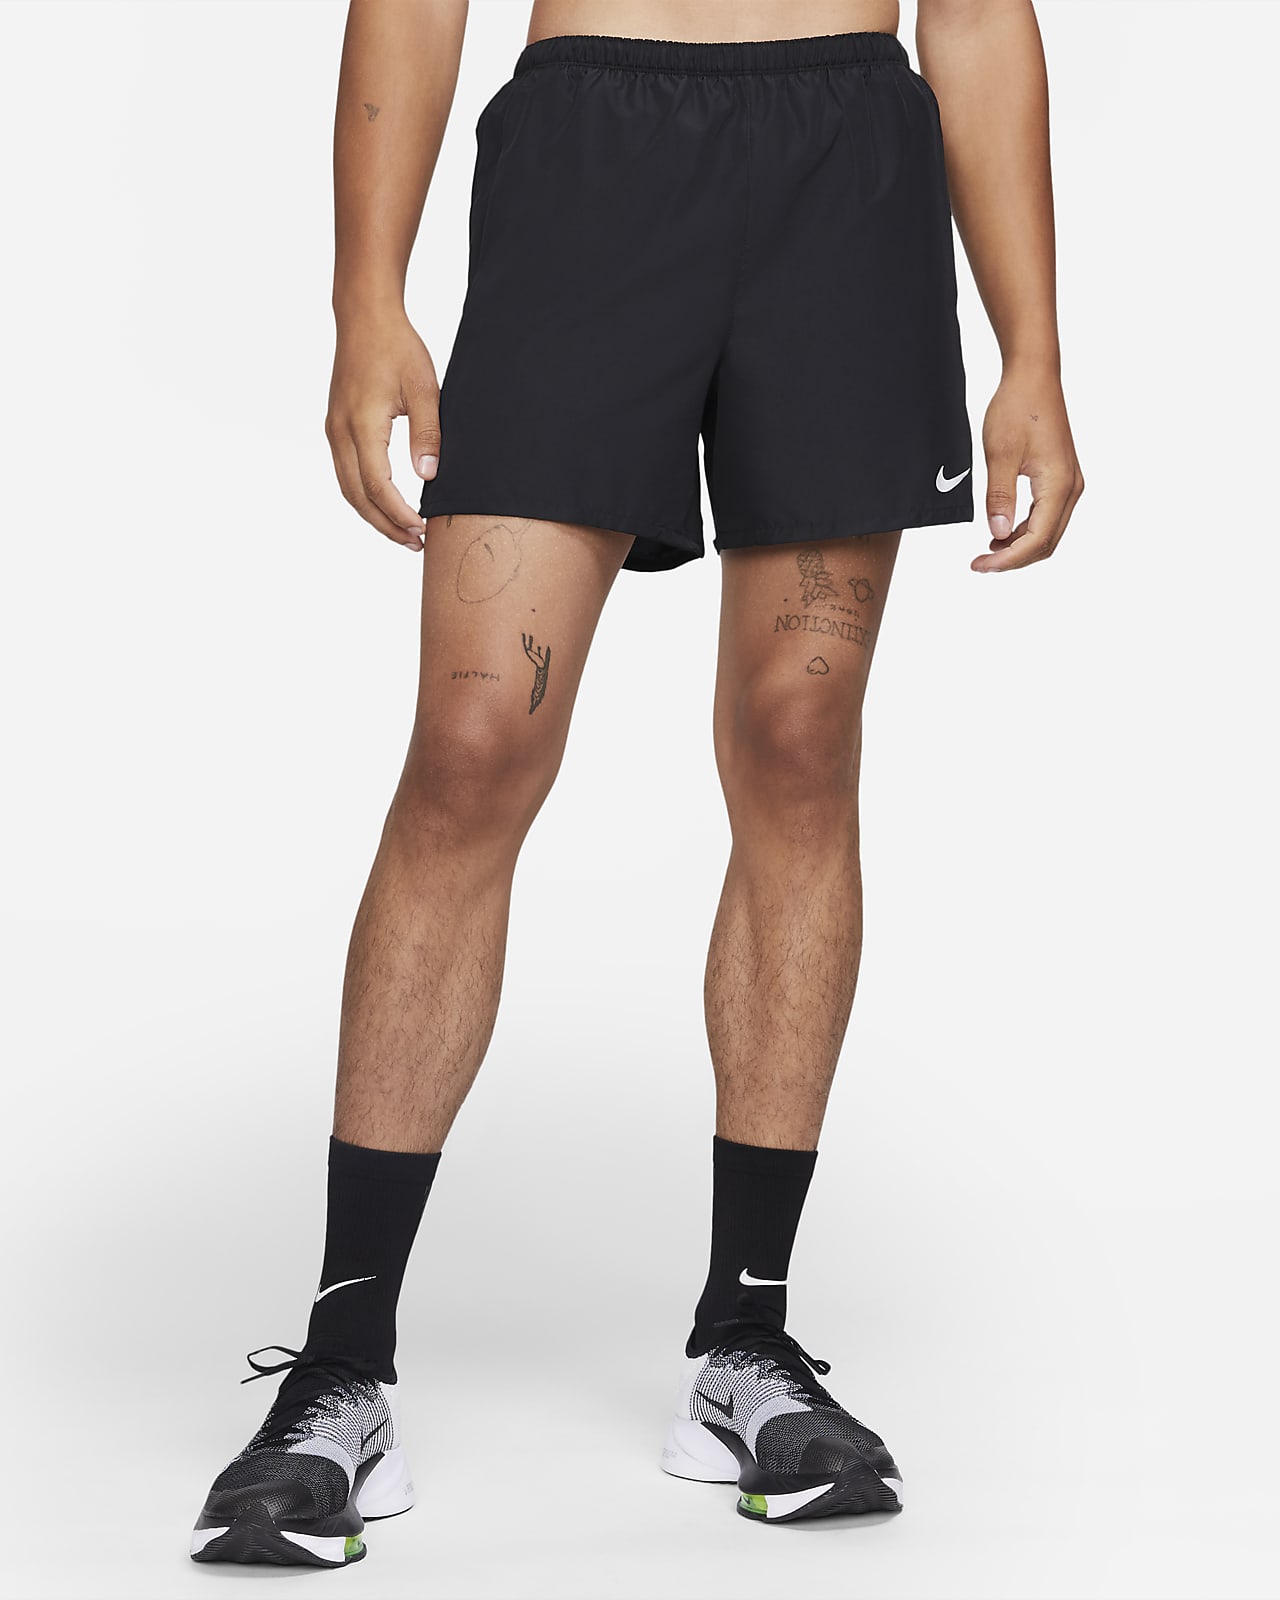 palm Repulsion aspect Nike Challenger Men's 13cm (approx.) Brief-Lined Running Shorts. Nike LU